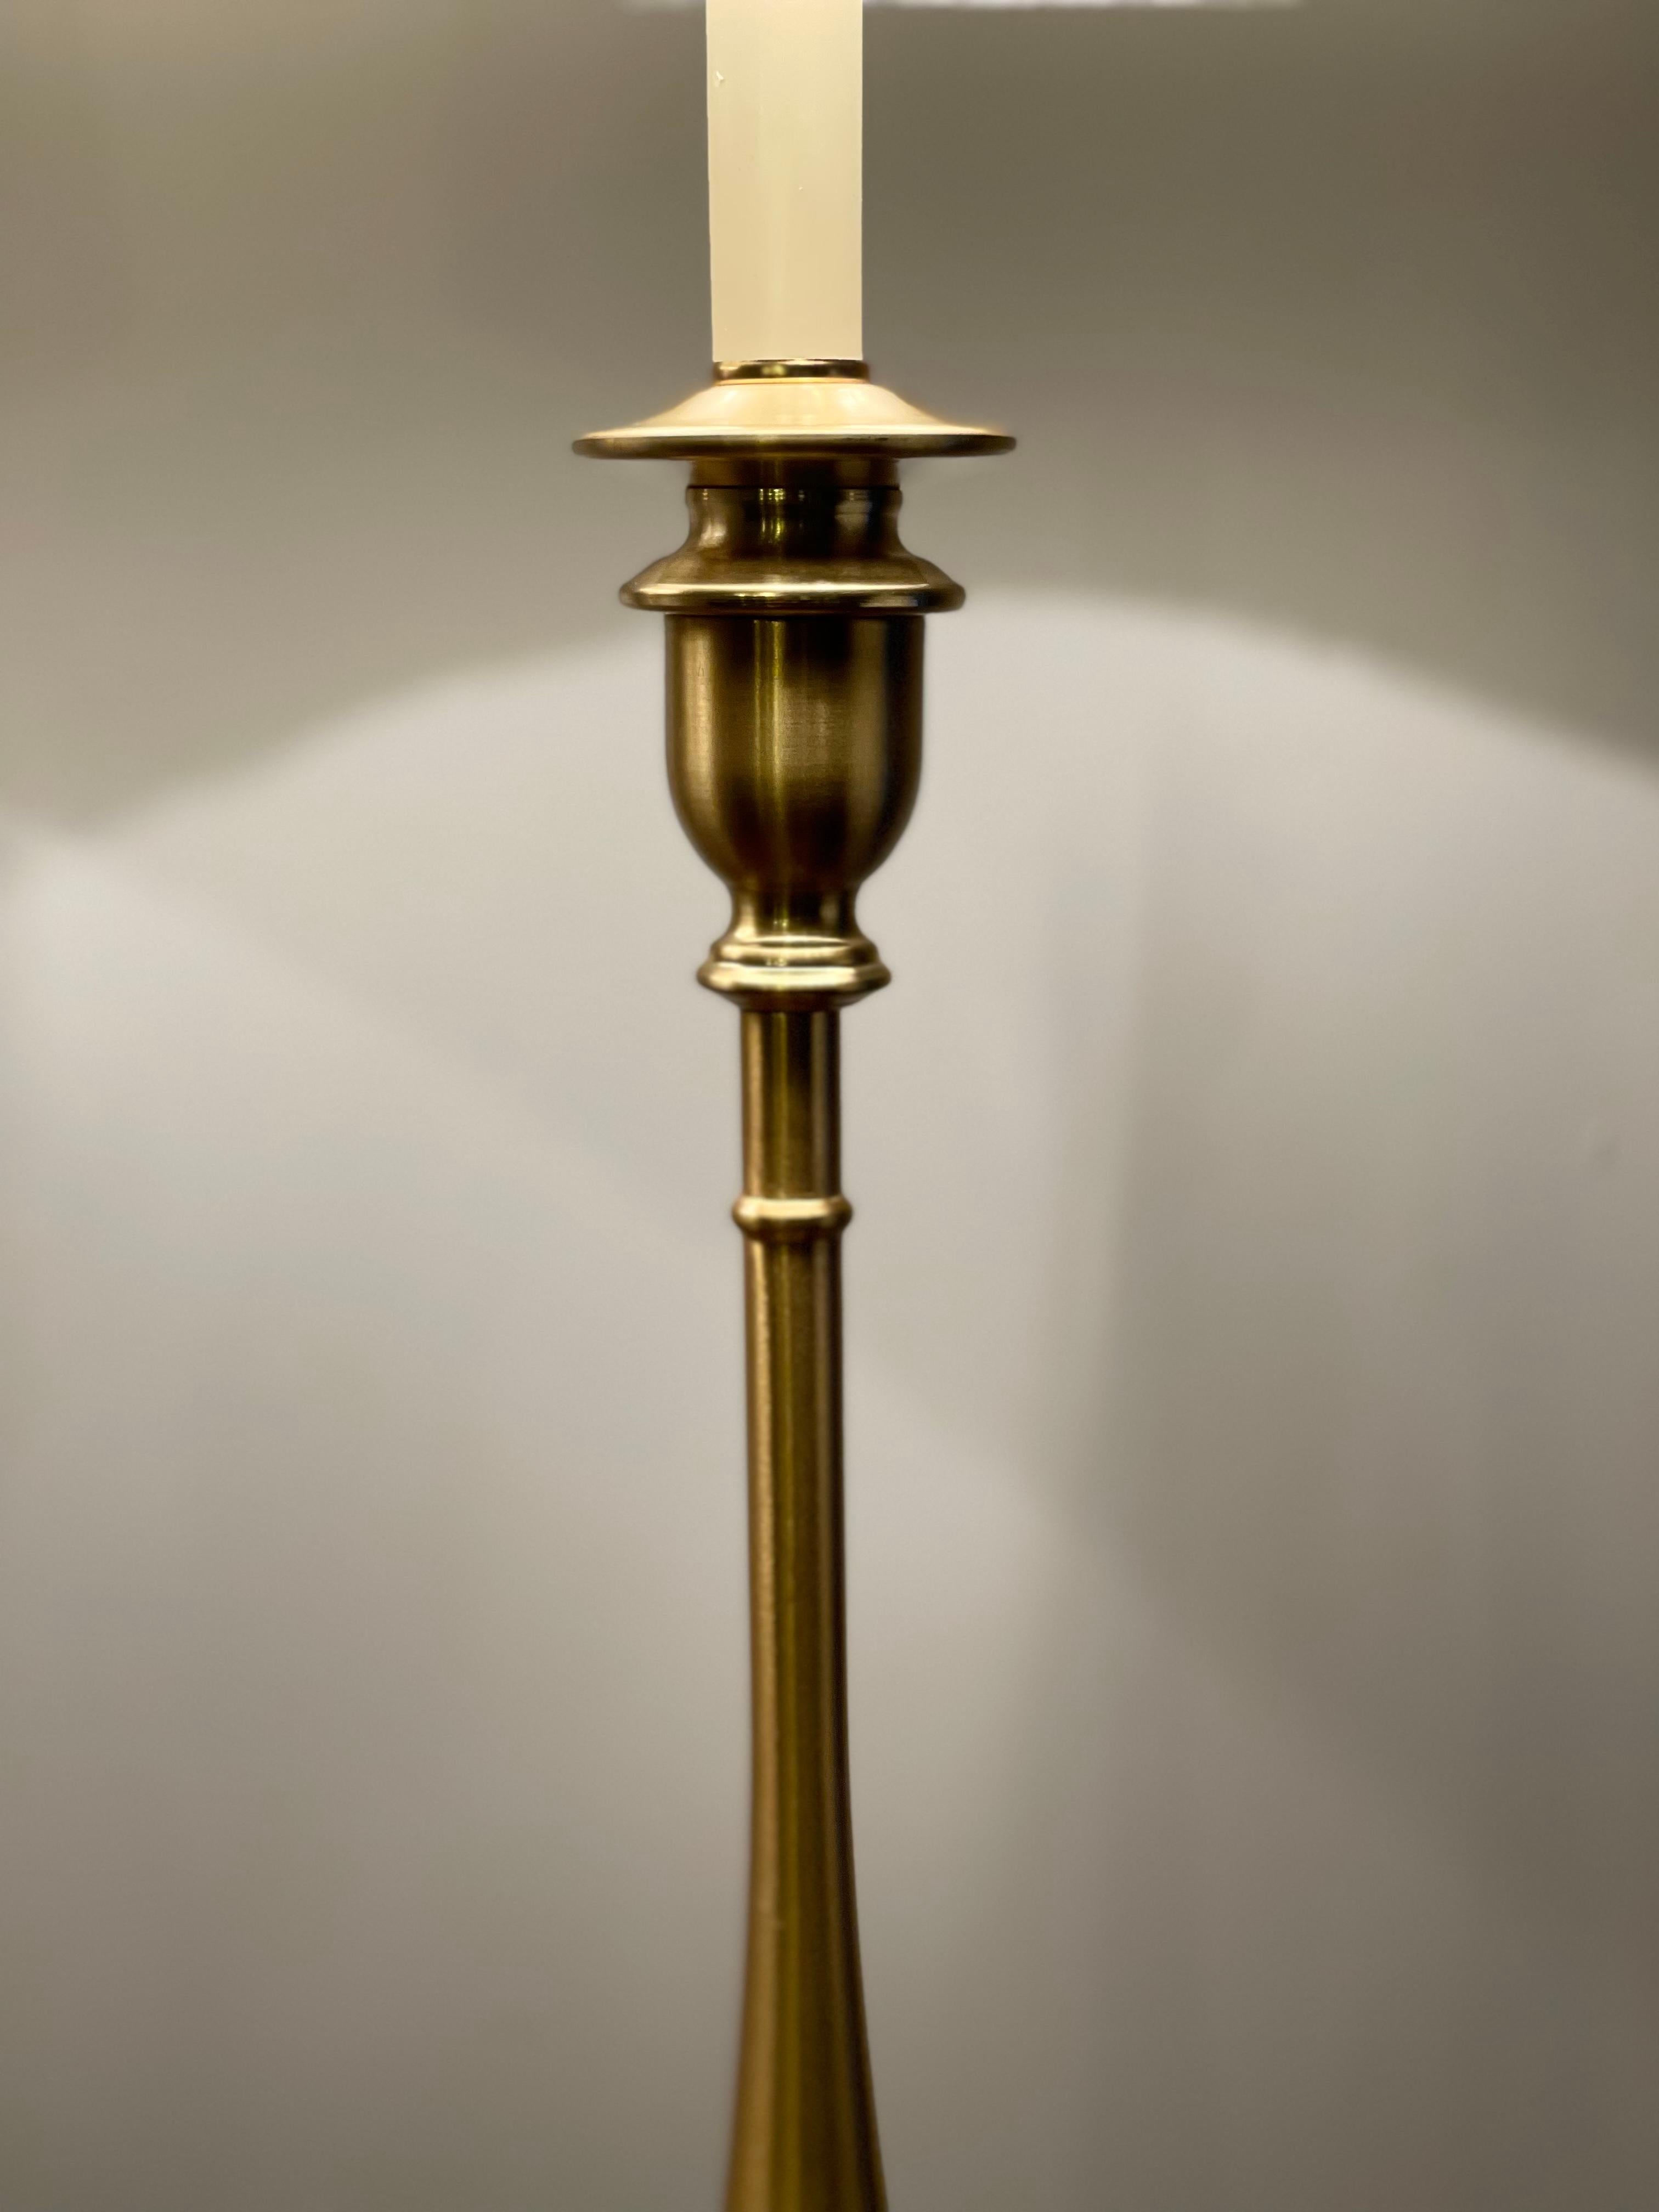 We are delighted to offer for sale this lovely brand new Ralph Lauren brass finish tall candlestick lamp with original shade.

This lamp is totally brand new, it has been removed from the box solely to take the pictures, it was then reboxed and is